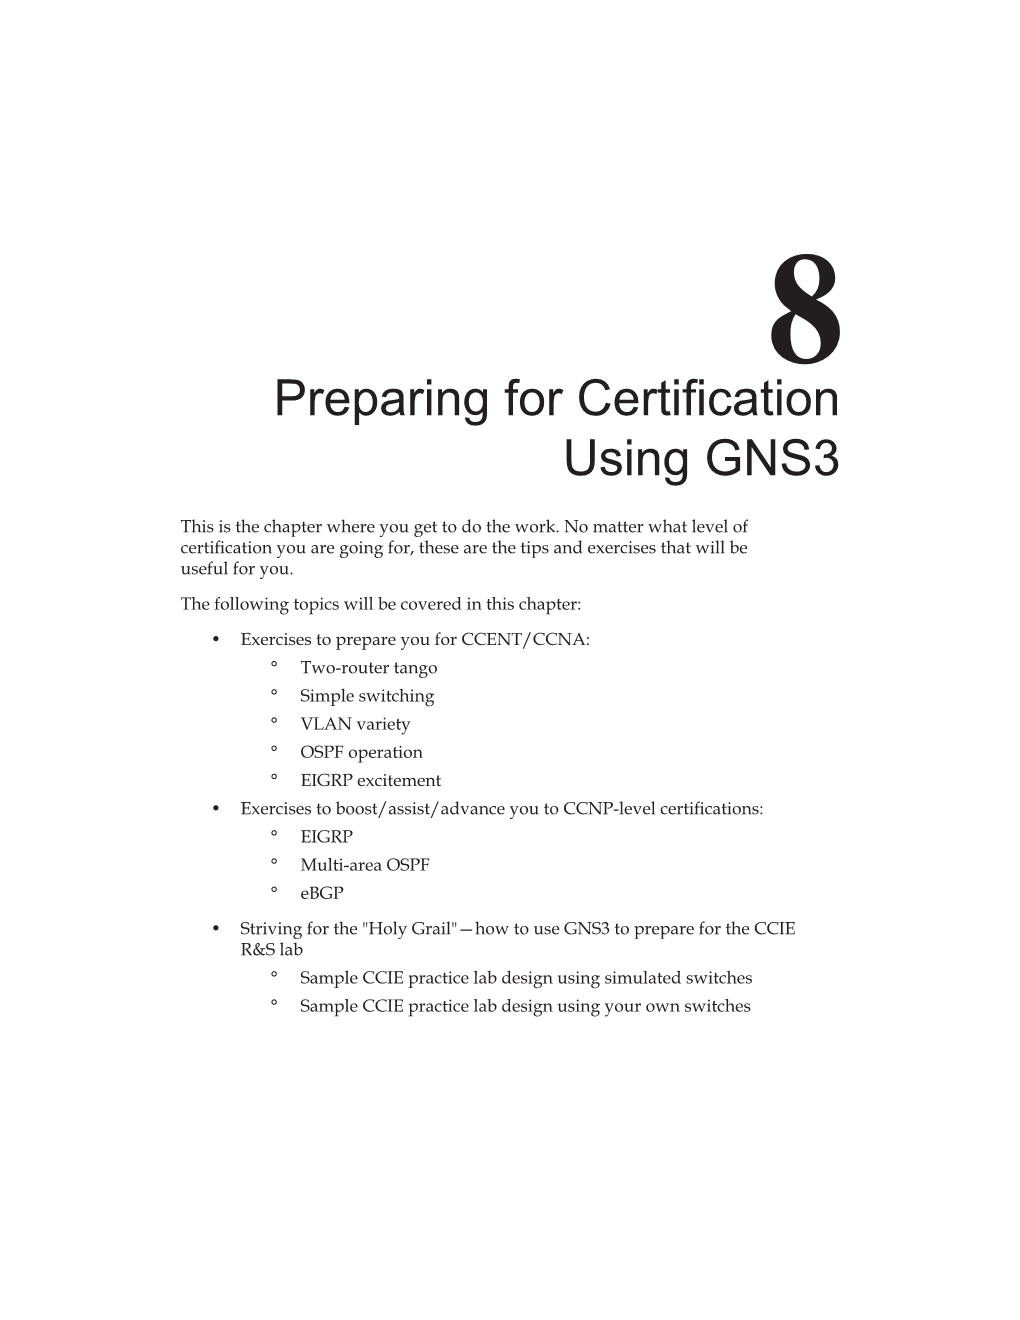 Preparing for Certification Using GNS3